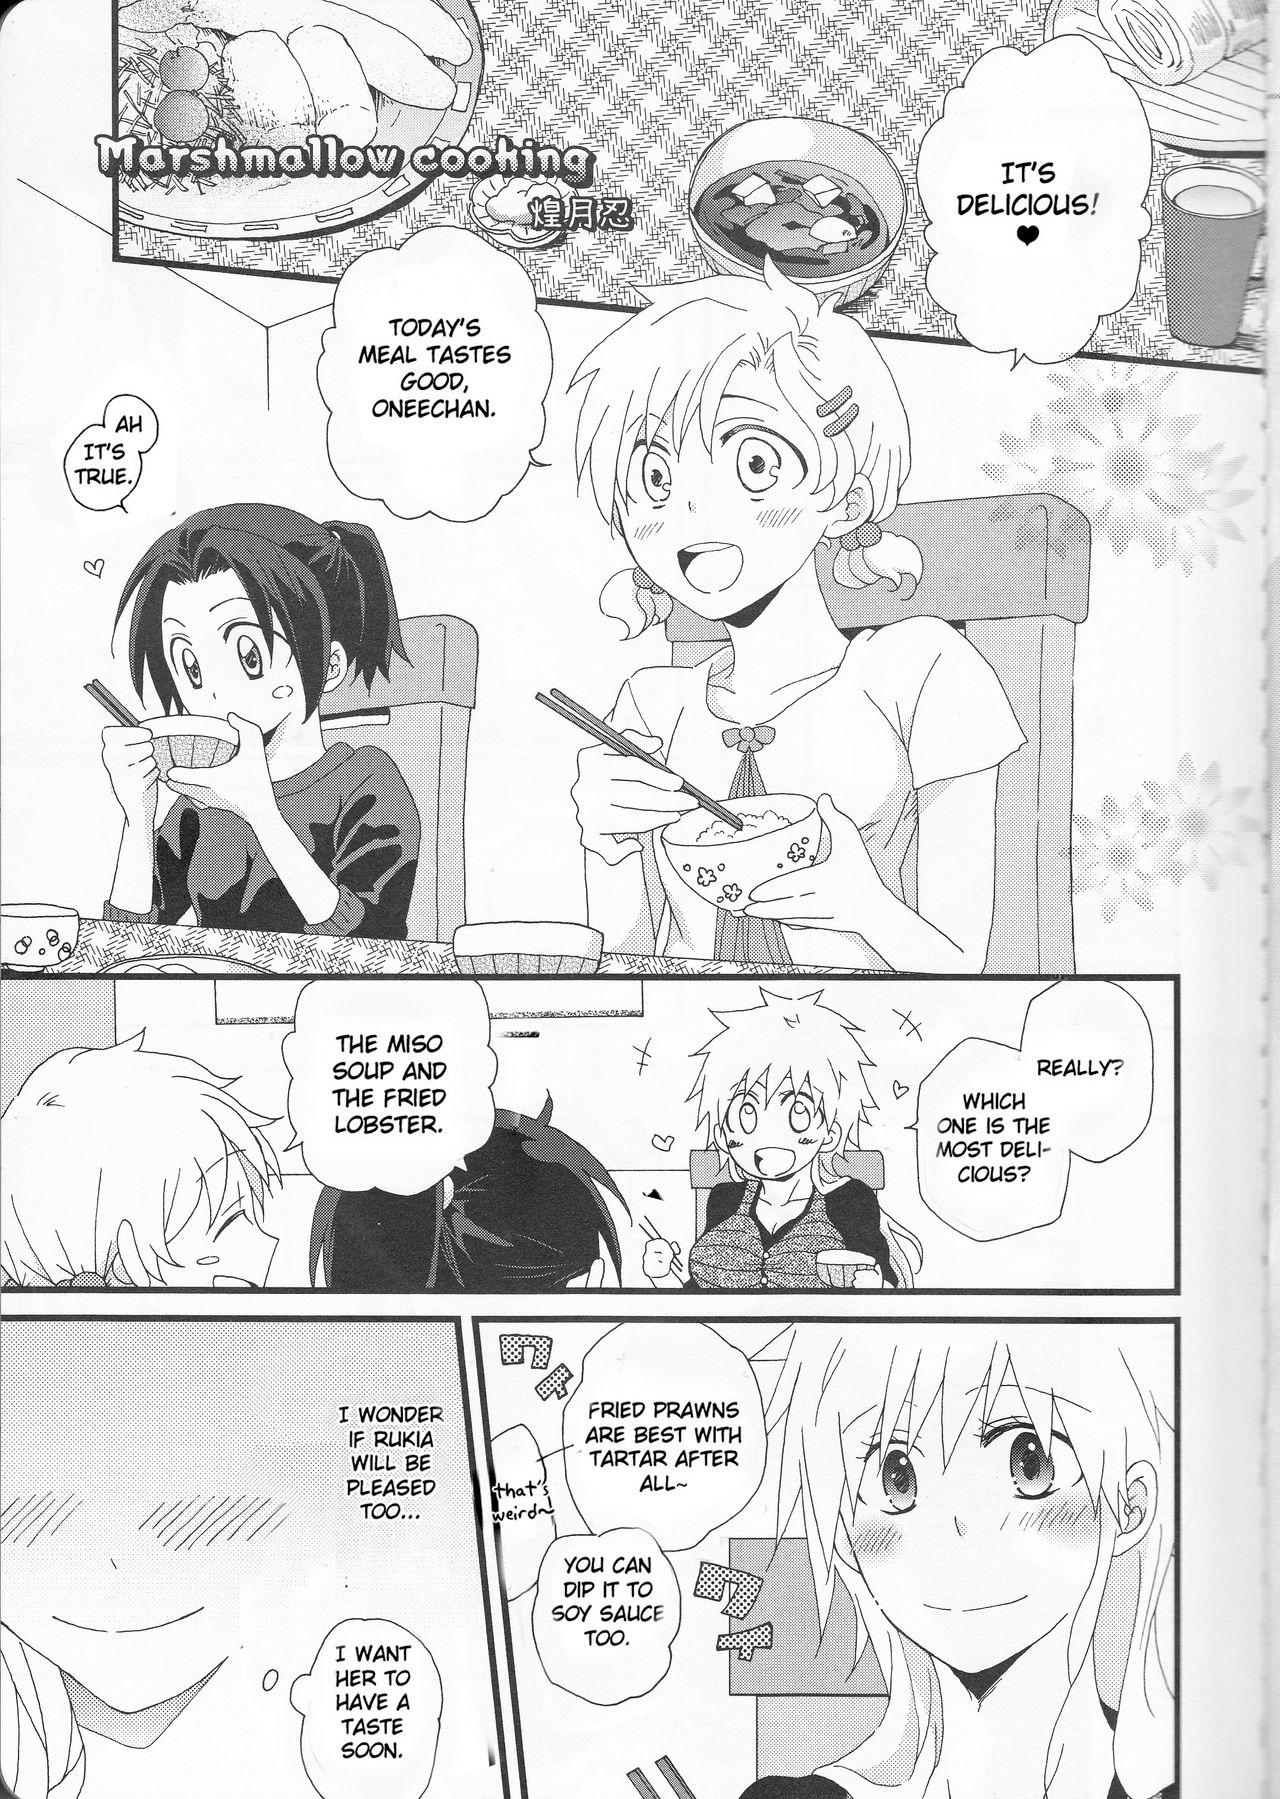 Hot Blow Jobs Marshmallow chocolate - Bleach Unshaved - Page 5